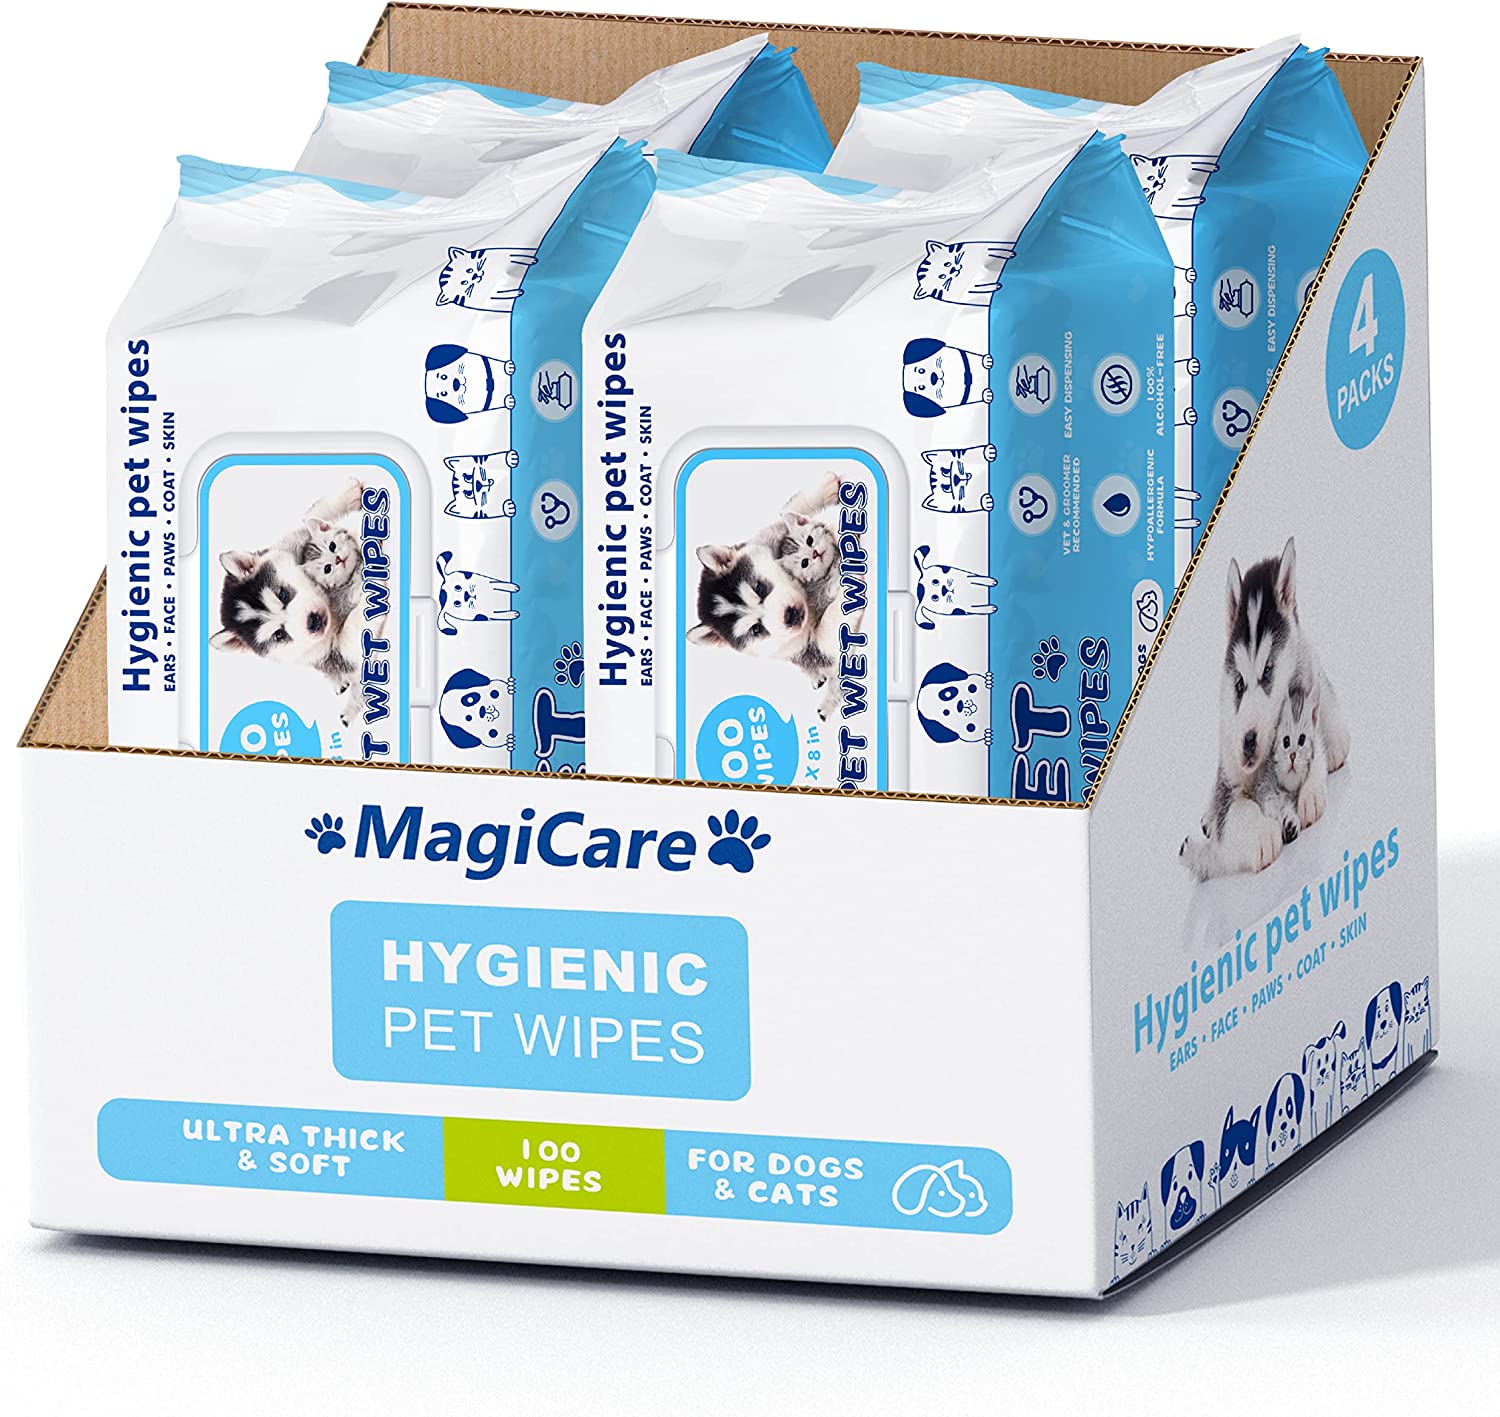 Magicare 75% Alcohol Wipes (80ct) | Hand Sanitizer Disinfecting Wipes